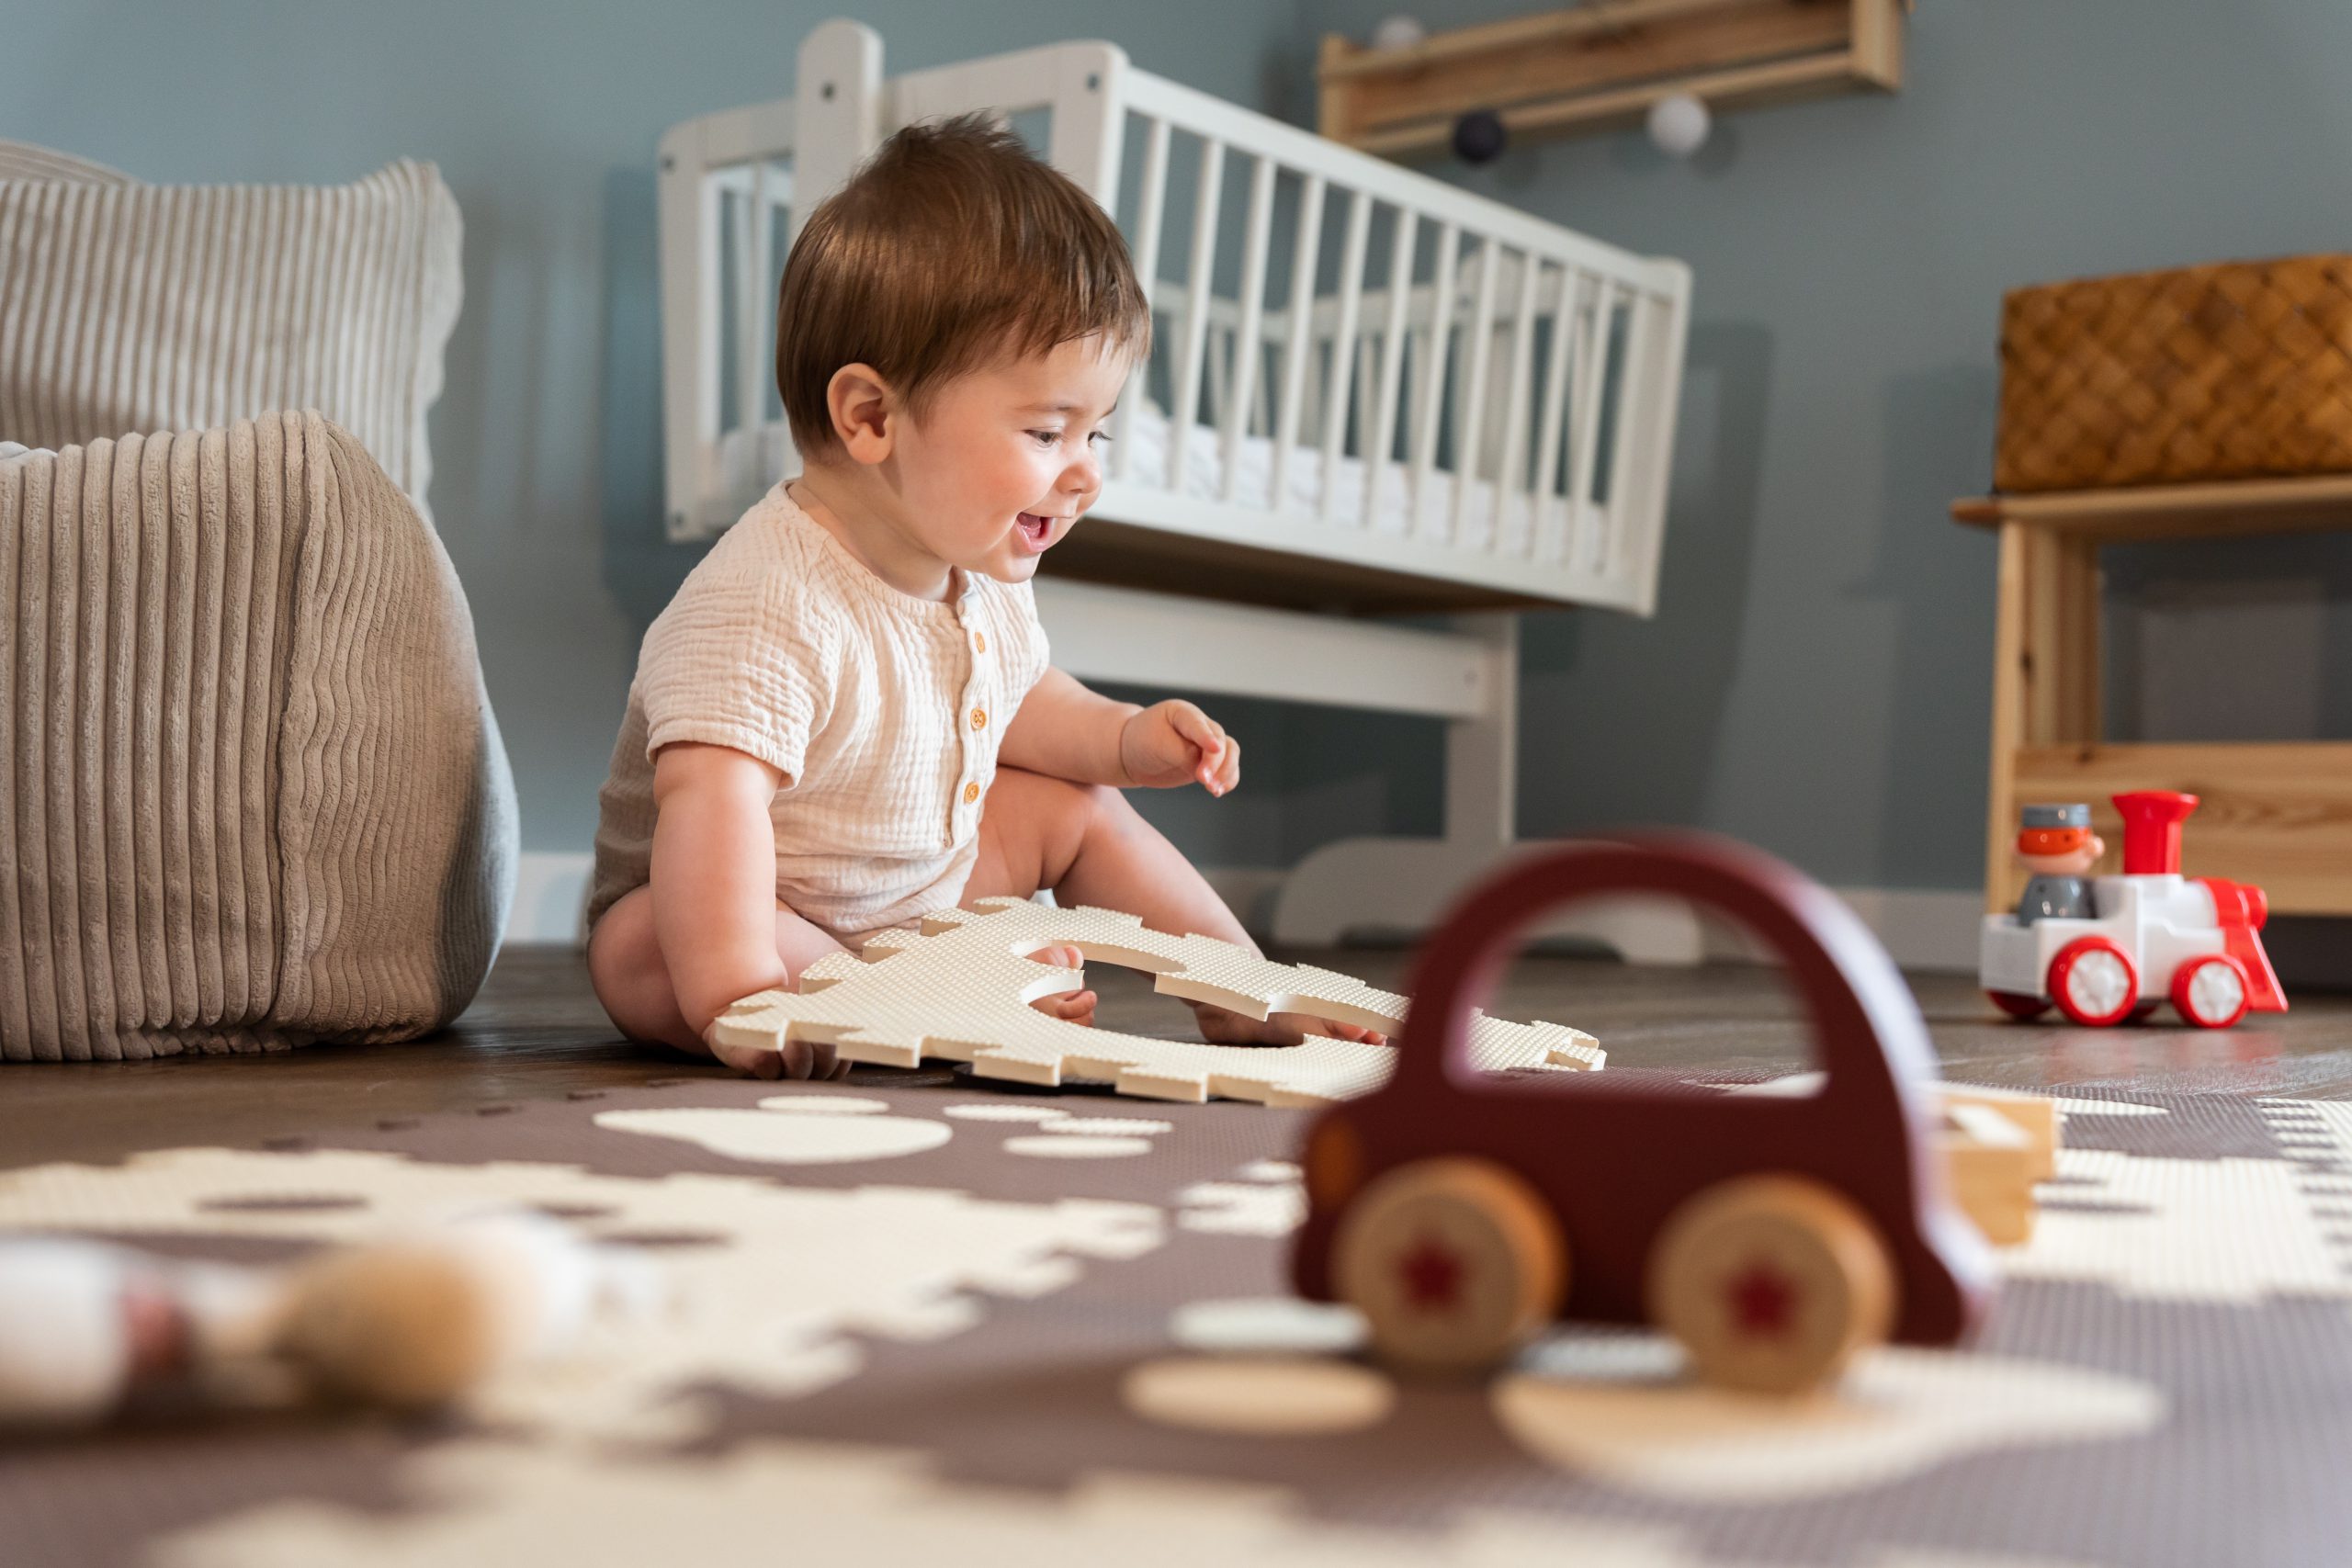 Cute Happy Baby Boy Playing Toys In His Child Room 2022 12 09 00 51 48 Utc